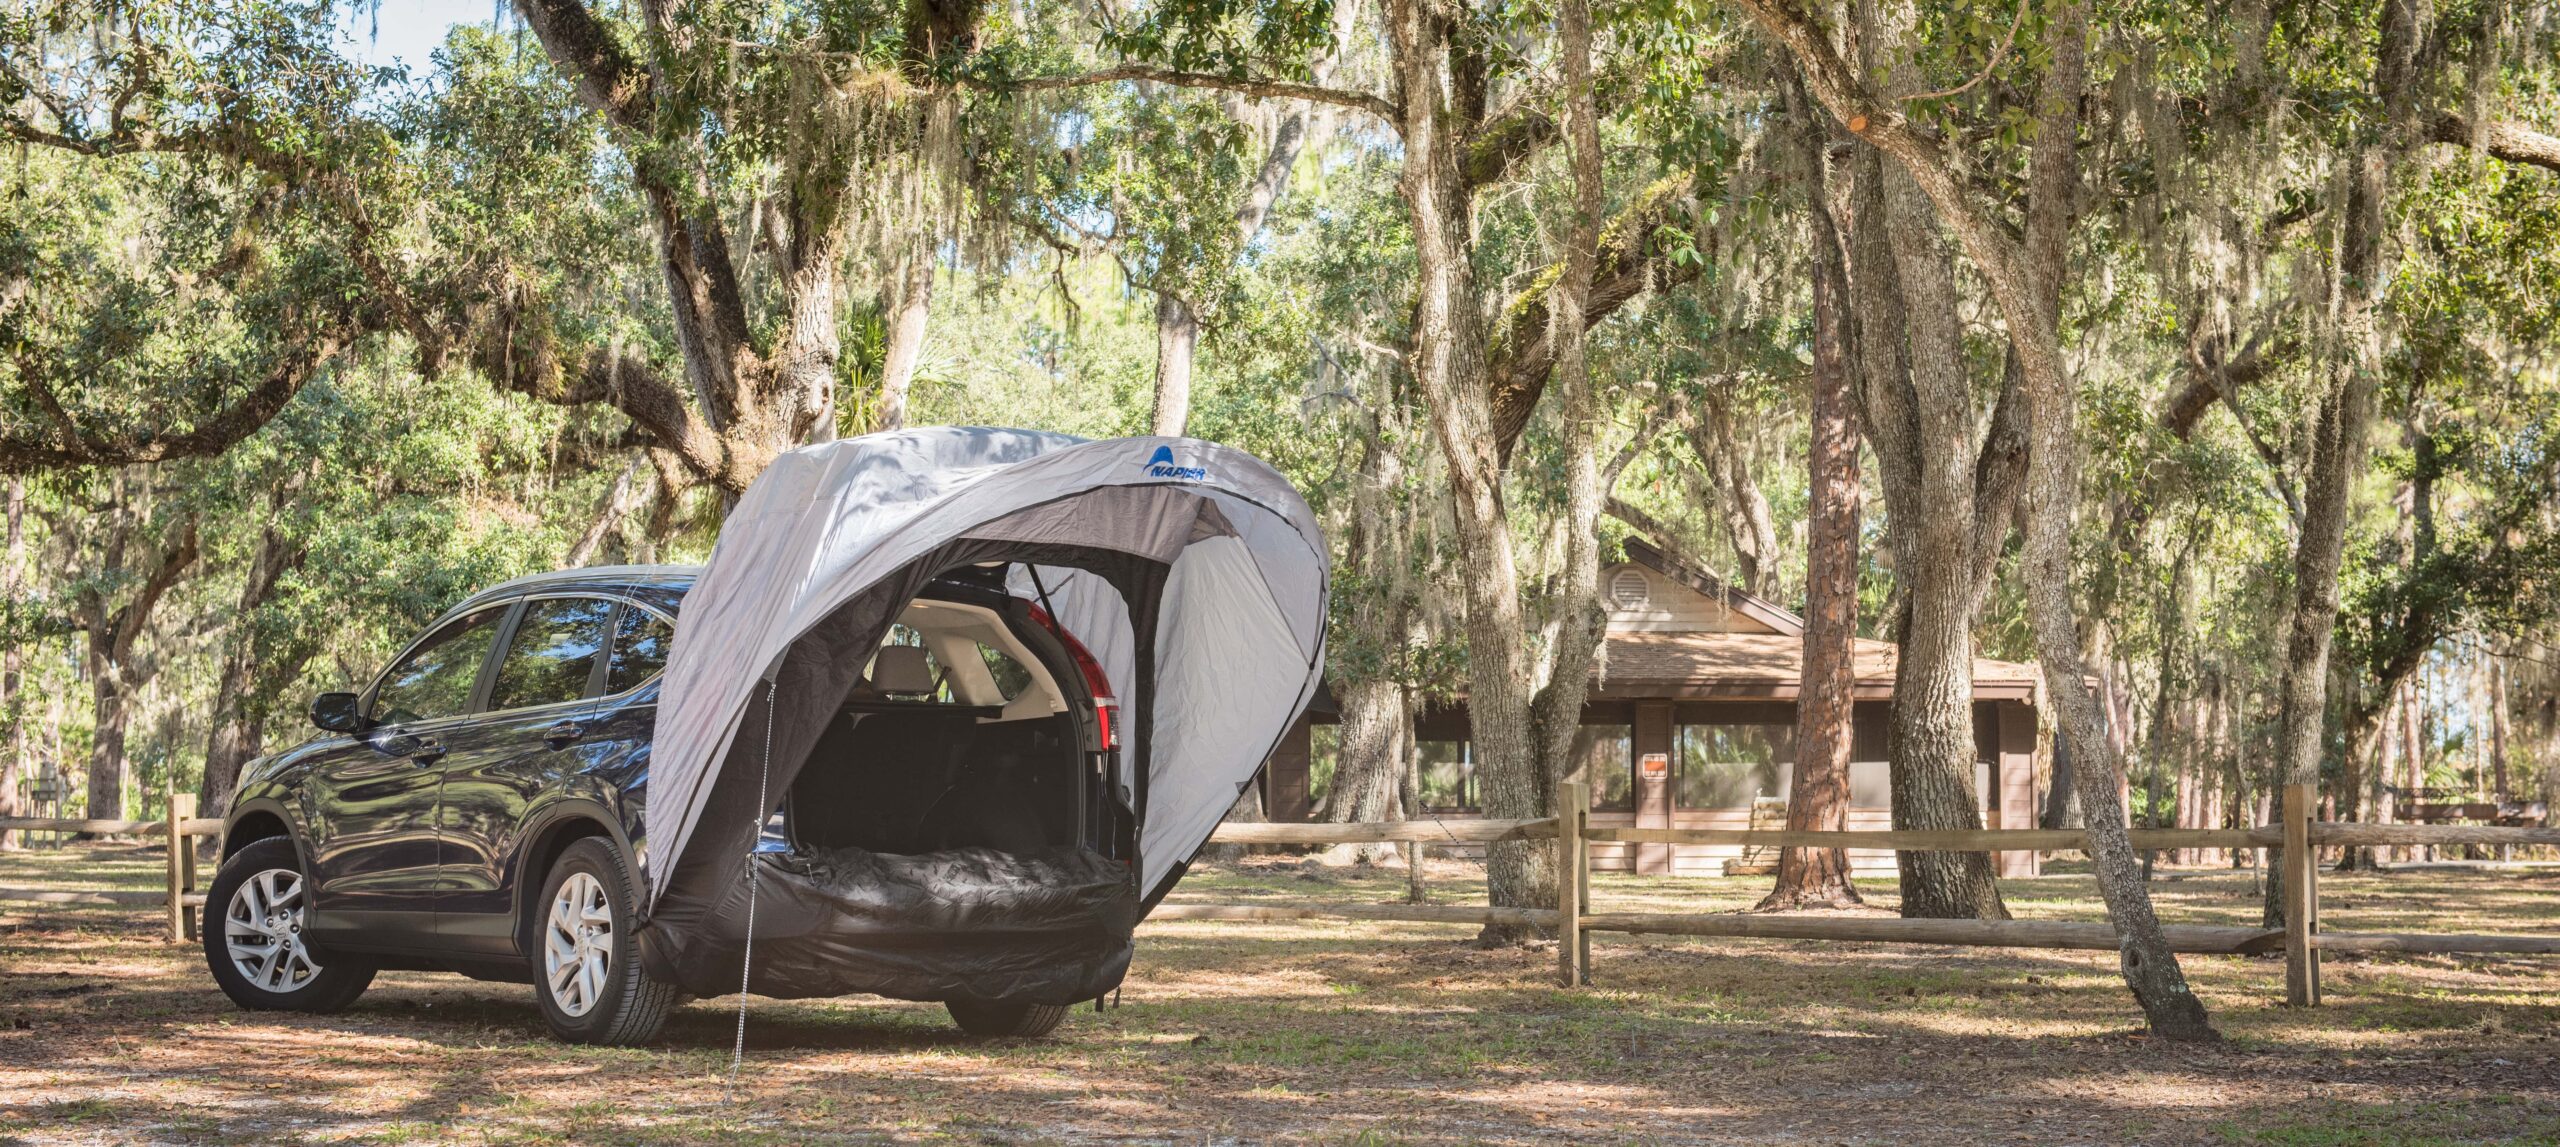 Sportz Cove Tent Review: A Weekend of Camping and Fishing Adventures